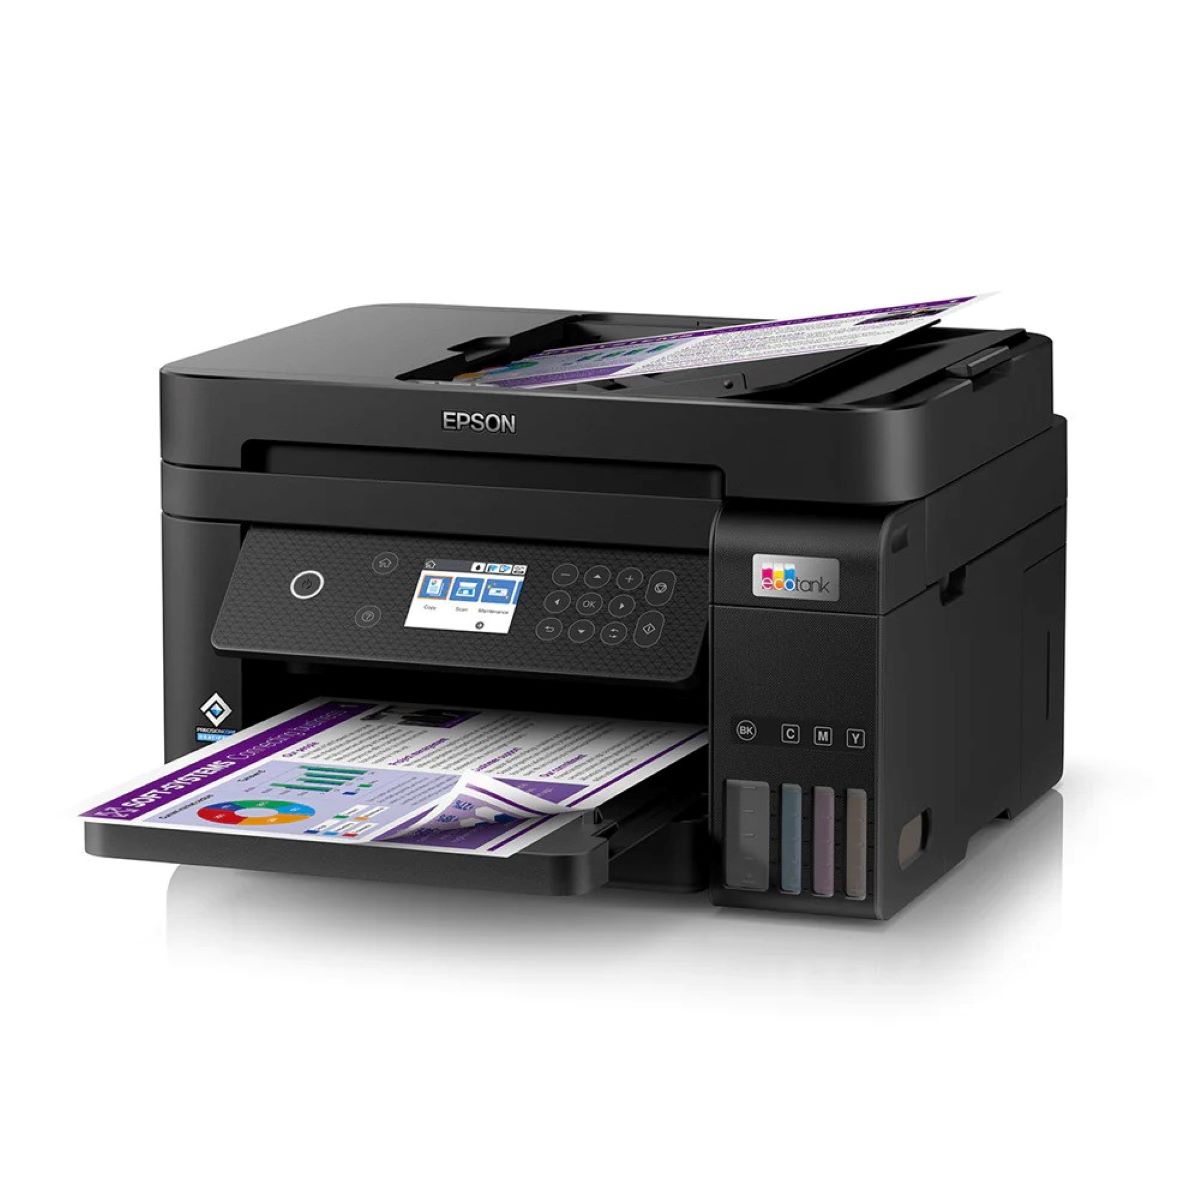 What Is Adf On A Printer